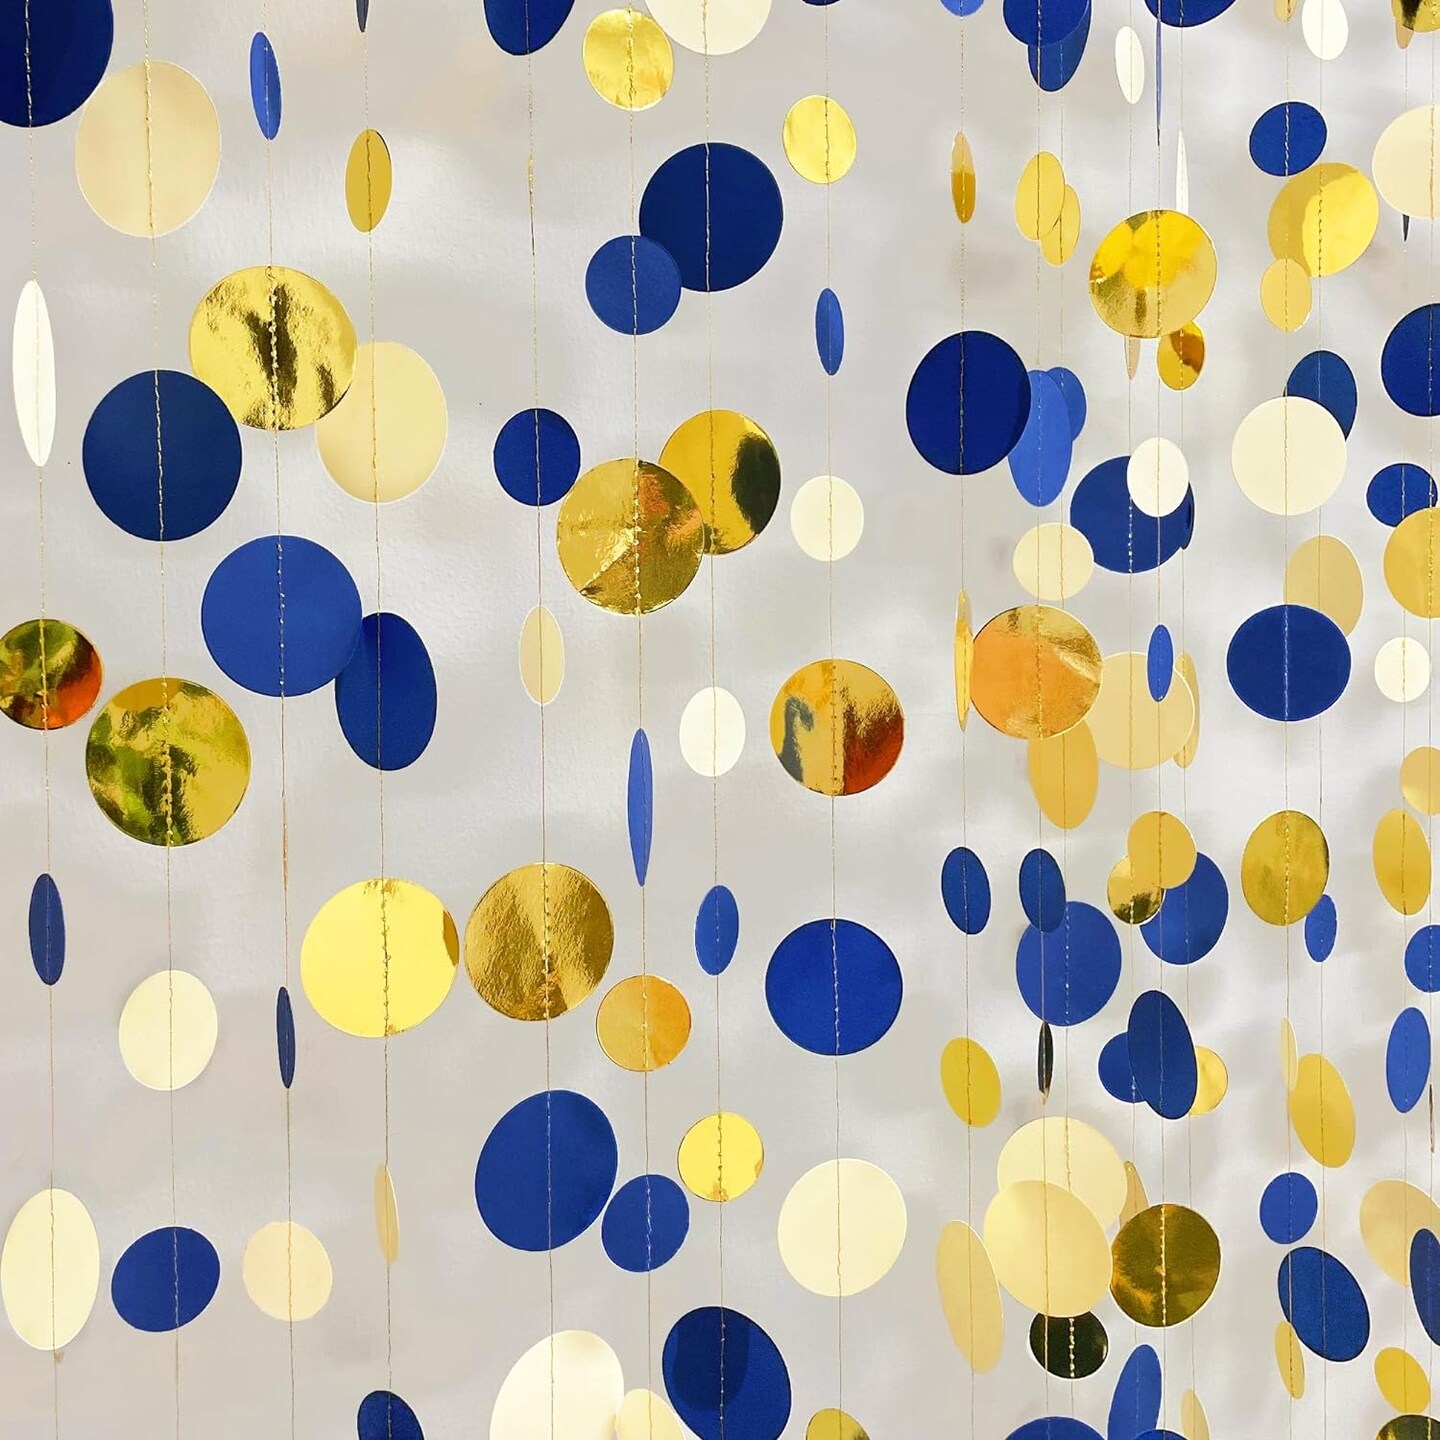 46 Ft Navy Blue and Gold Circle Dots Garland Royal Blue Hanging Paper Polka Dot Streamer for Birthday Wedding Bridal Baby Shower Graduations Nautical Ahoy Achor Pirate Theme Party Decorations Supplies